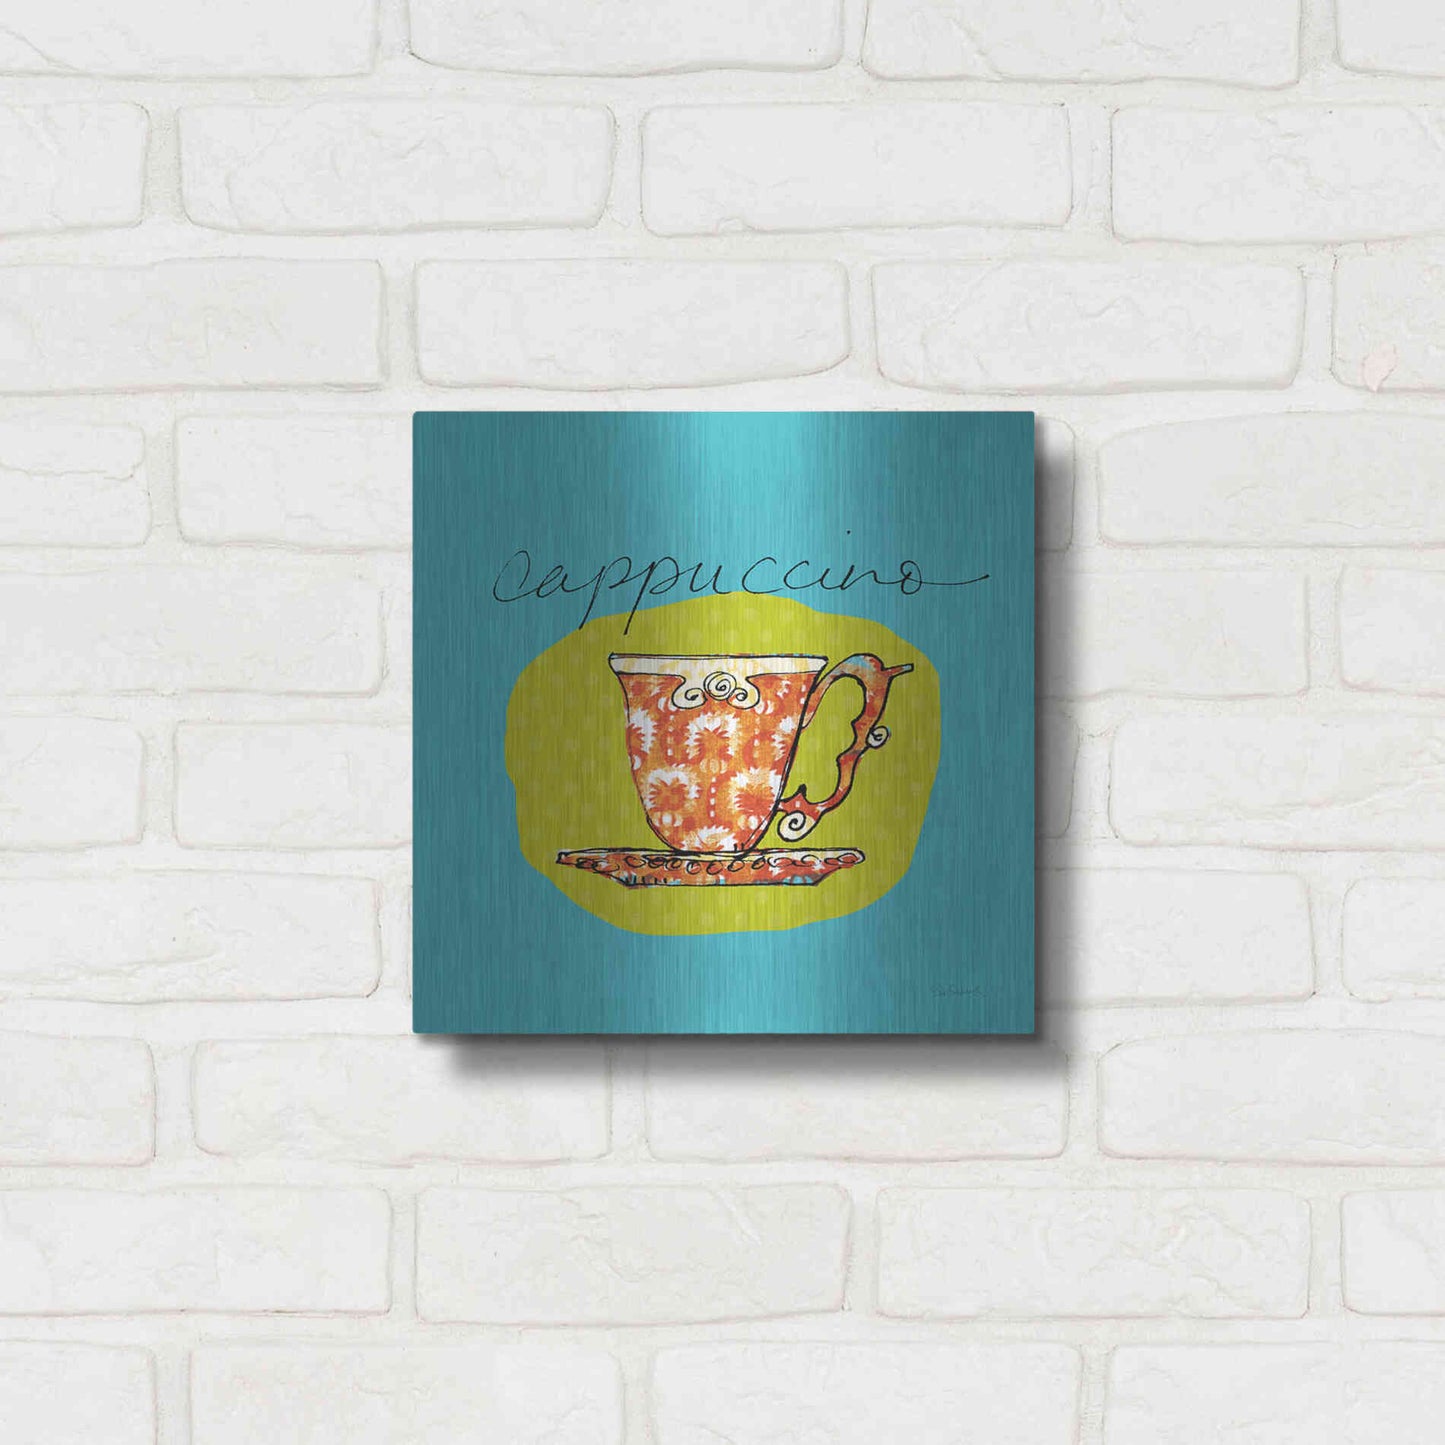 Luxe Metal Art 'Colorful Coffee Cappuccino No Border' by Sue Schlabach, Metal Wall Art,12x12